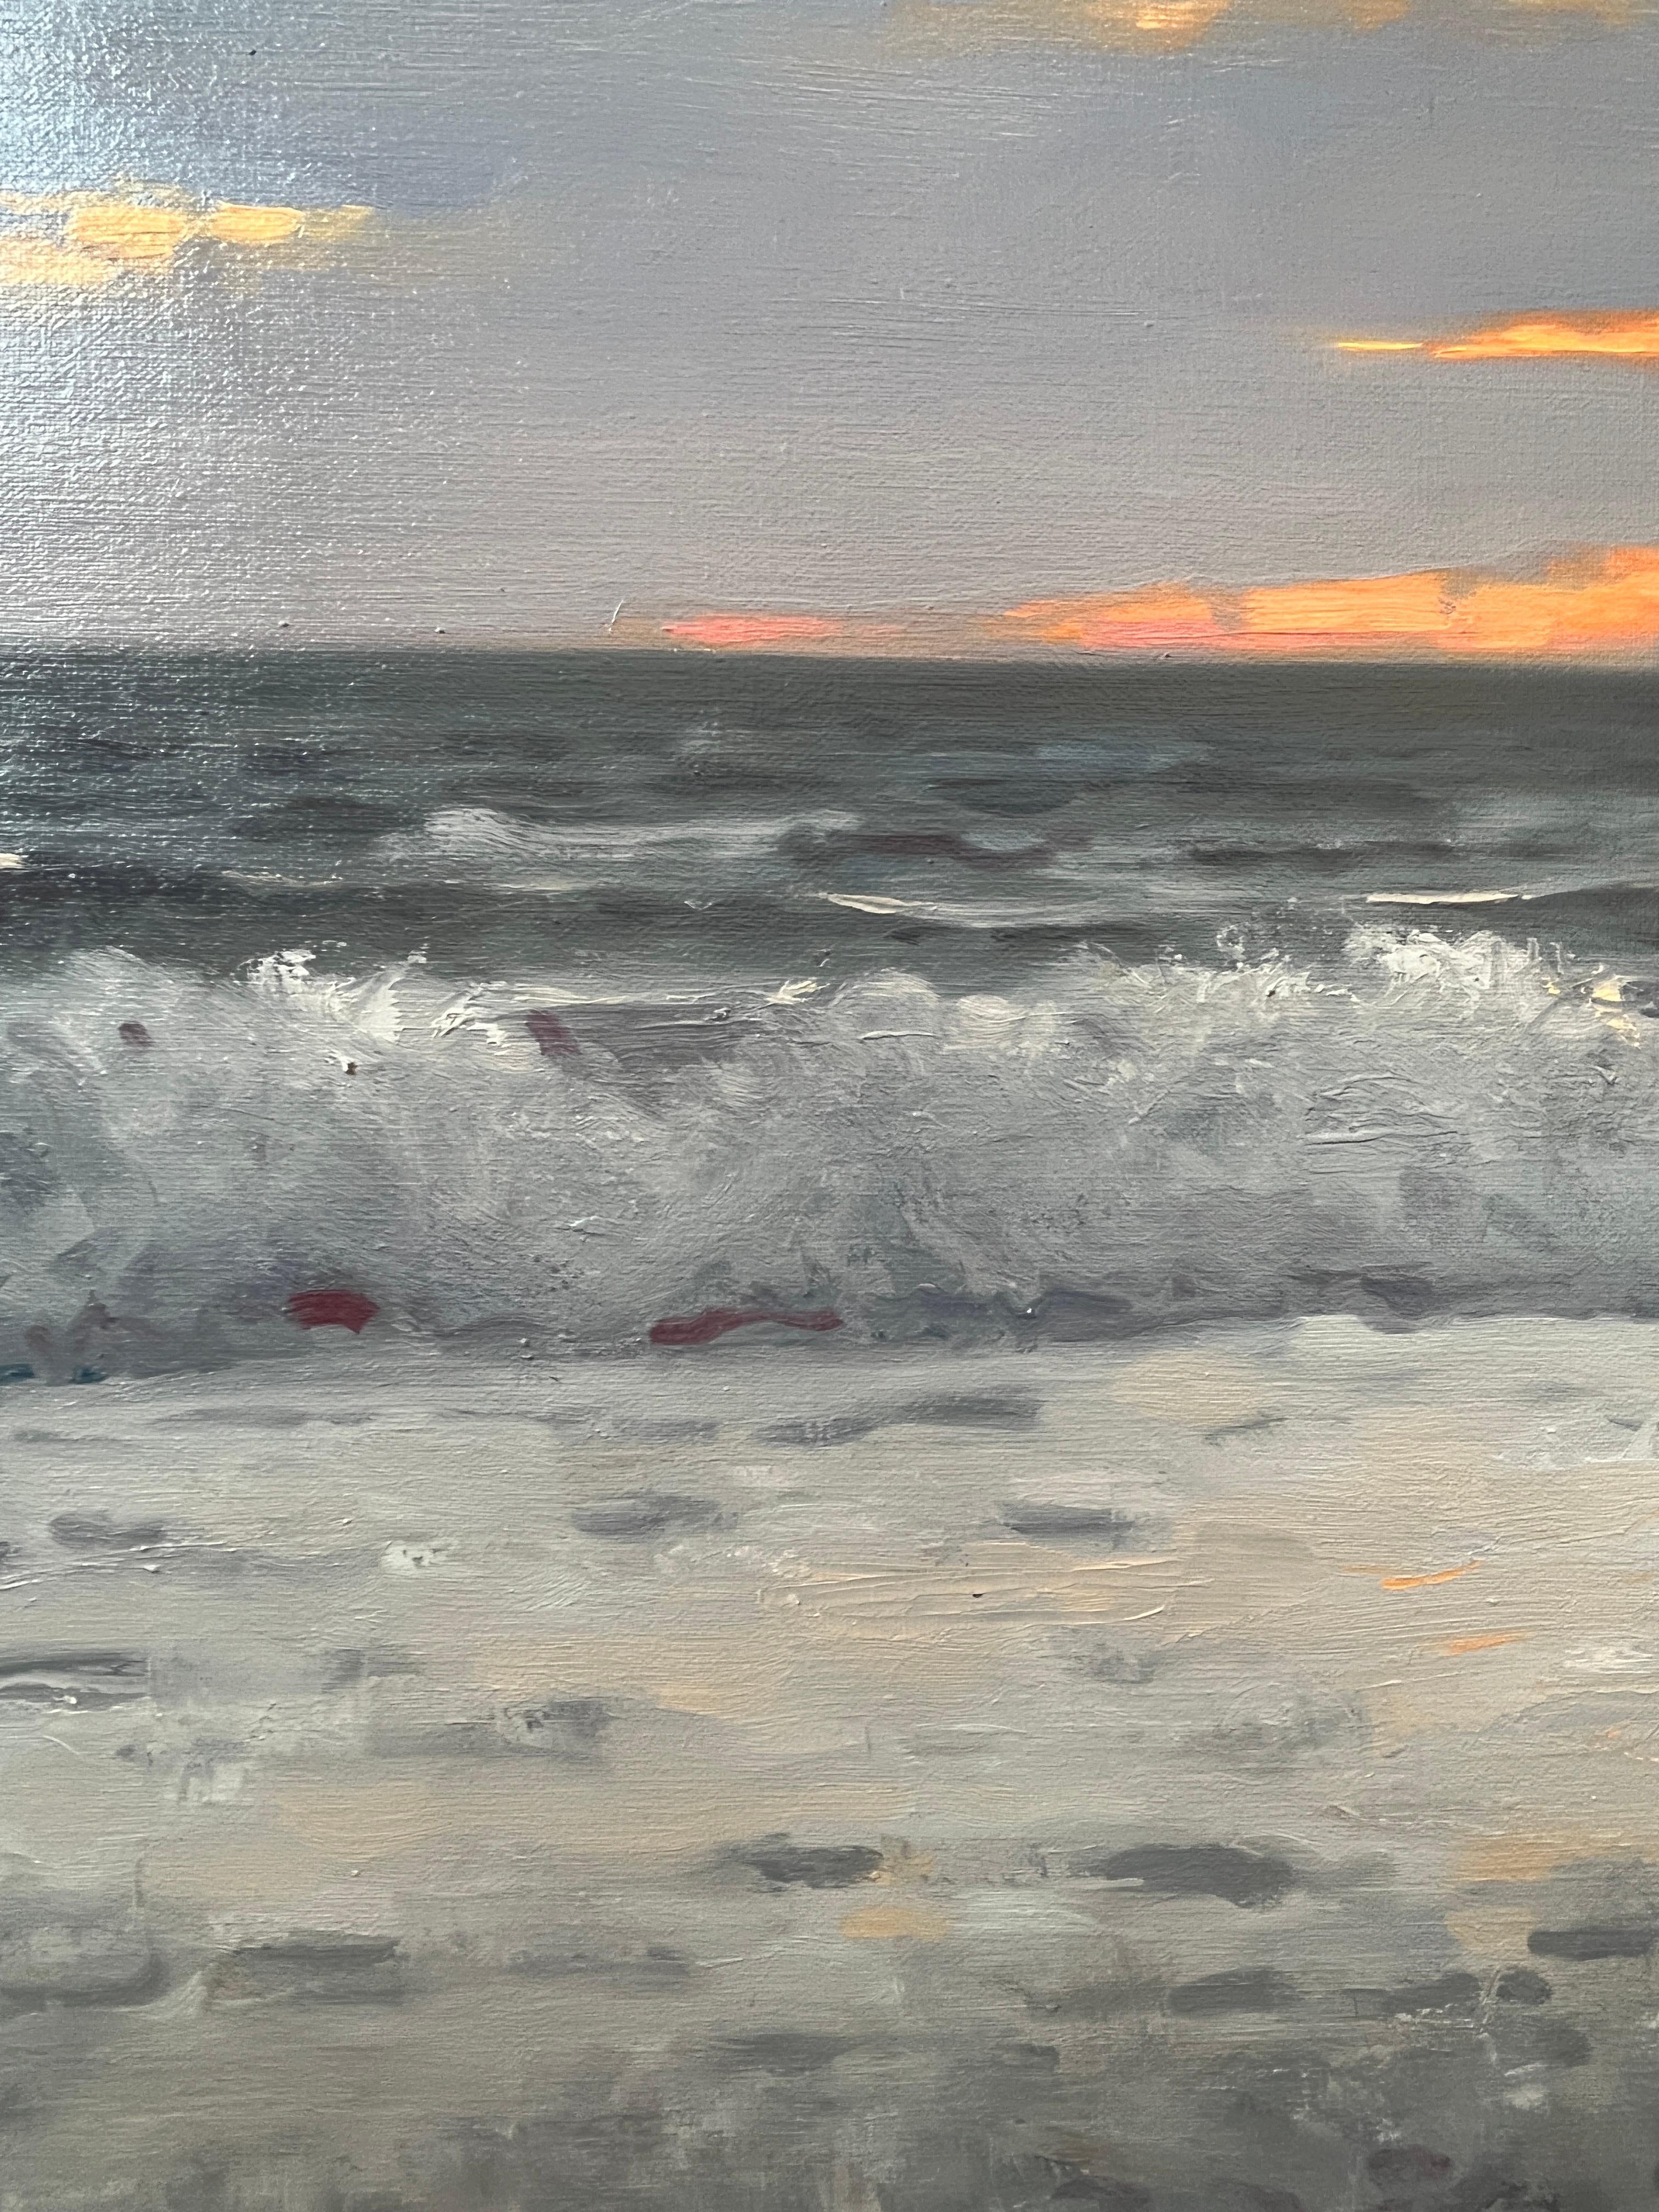 Sunset Off the Coast is an original oil painting on linen canvas. It is framed in a black frame with a gold lip and measures overall, approximately 25x35 inches.

Since he was a child, Patrick Okrasinski (b. 1996)  had an eye towards the natural